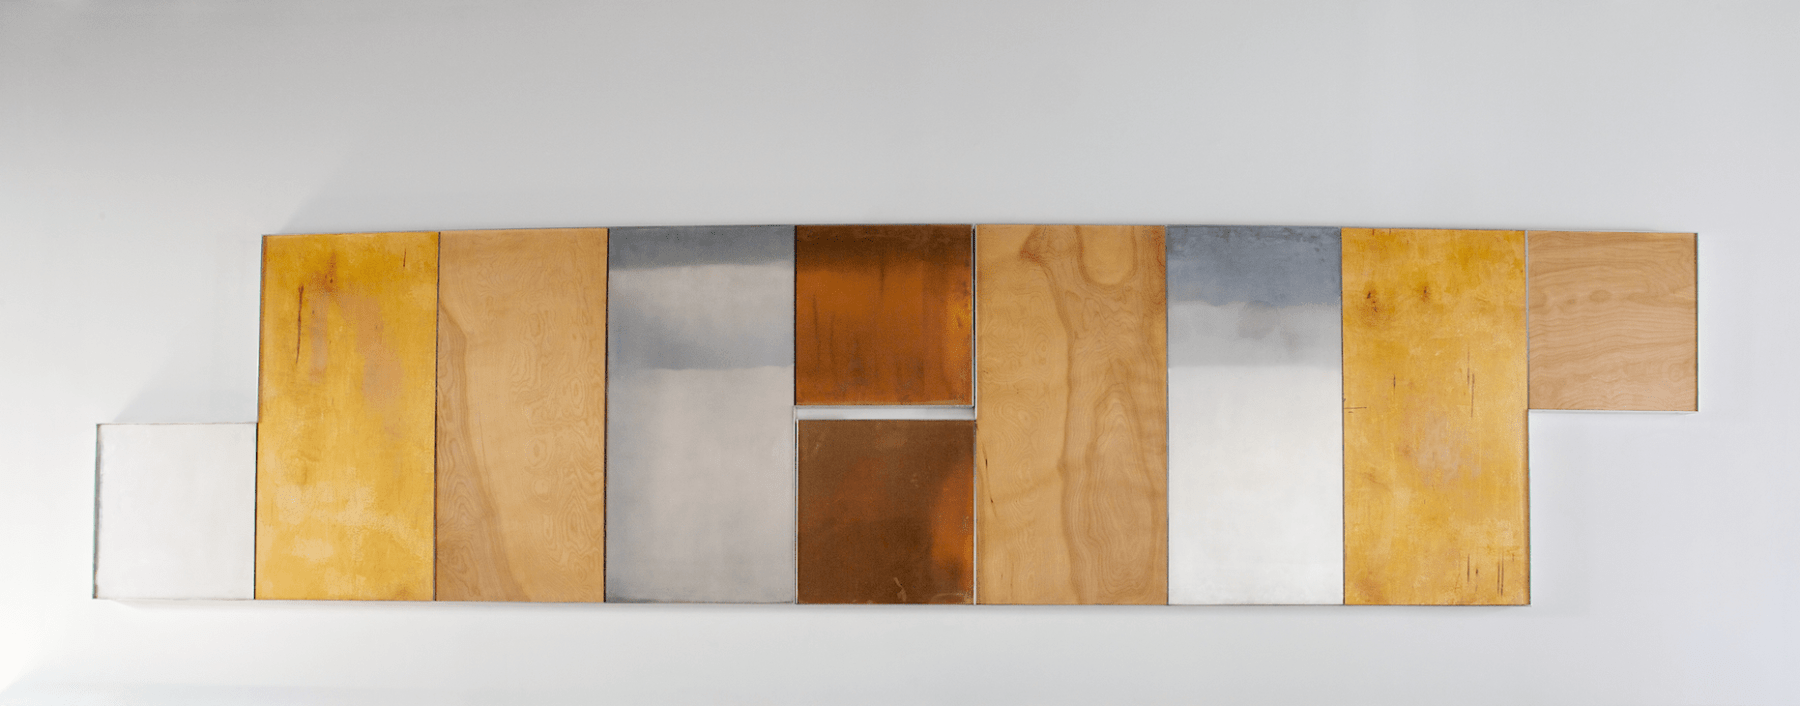 Three Specific Objects, 2004
Copper, birch, aluminum, and maple
40.5&amp;nbsp;x 175 in (overall dimensions of two panels)